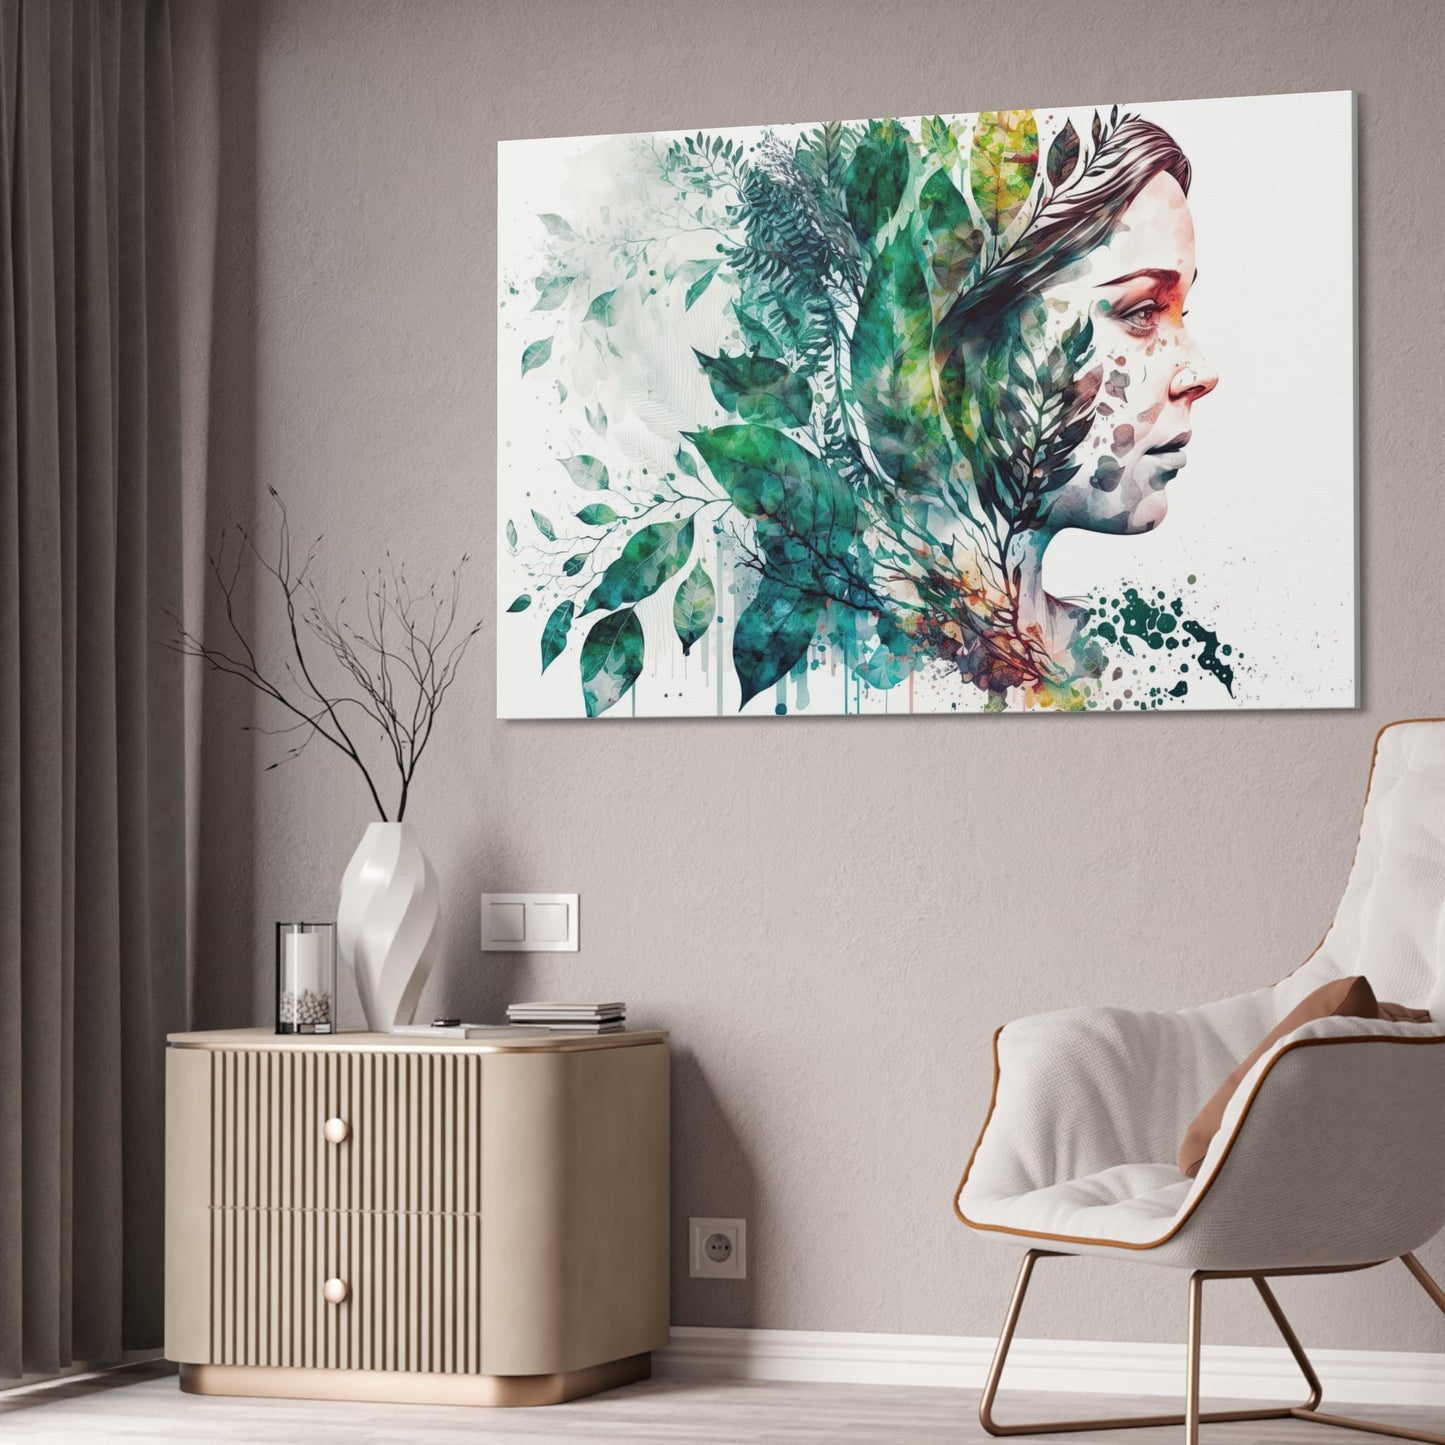 Moment of Peace: Wall Art of a Relaxing Scene on Natural Canvas